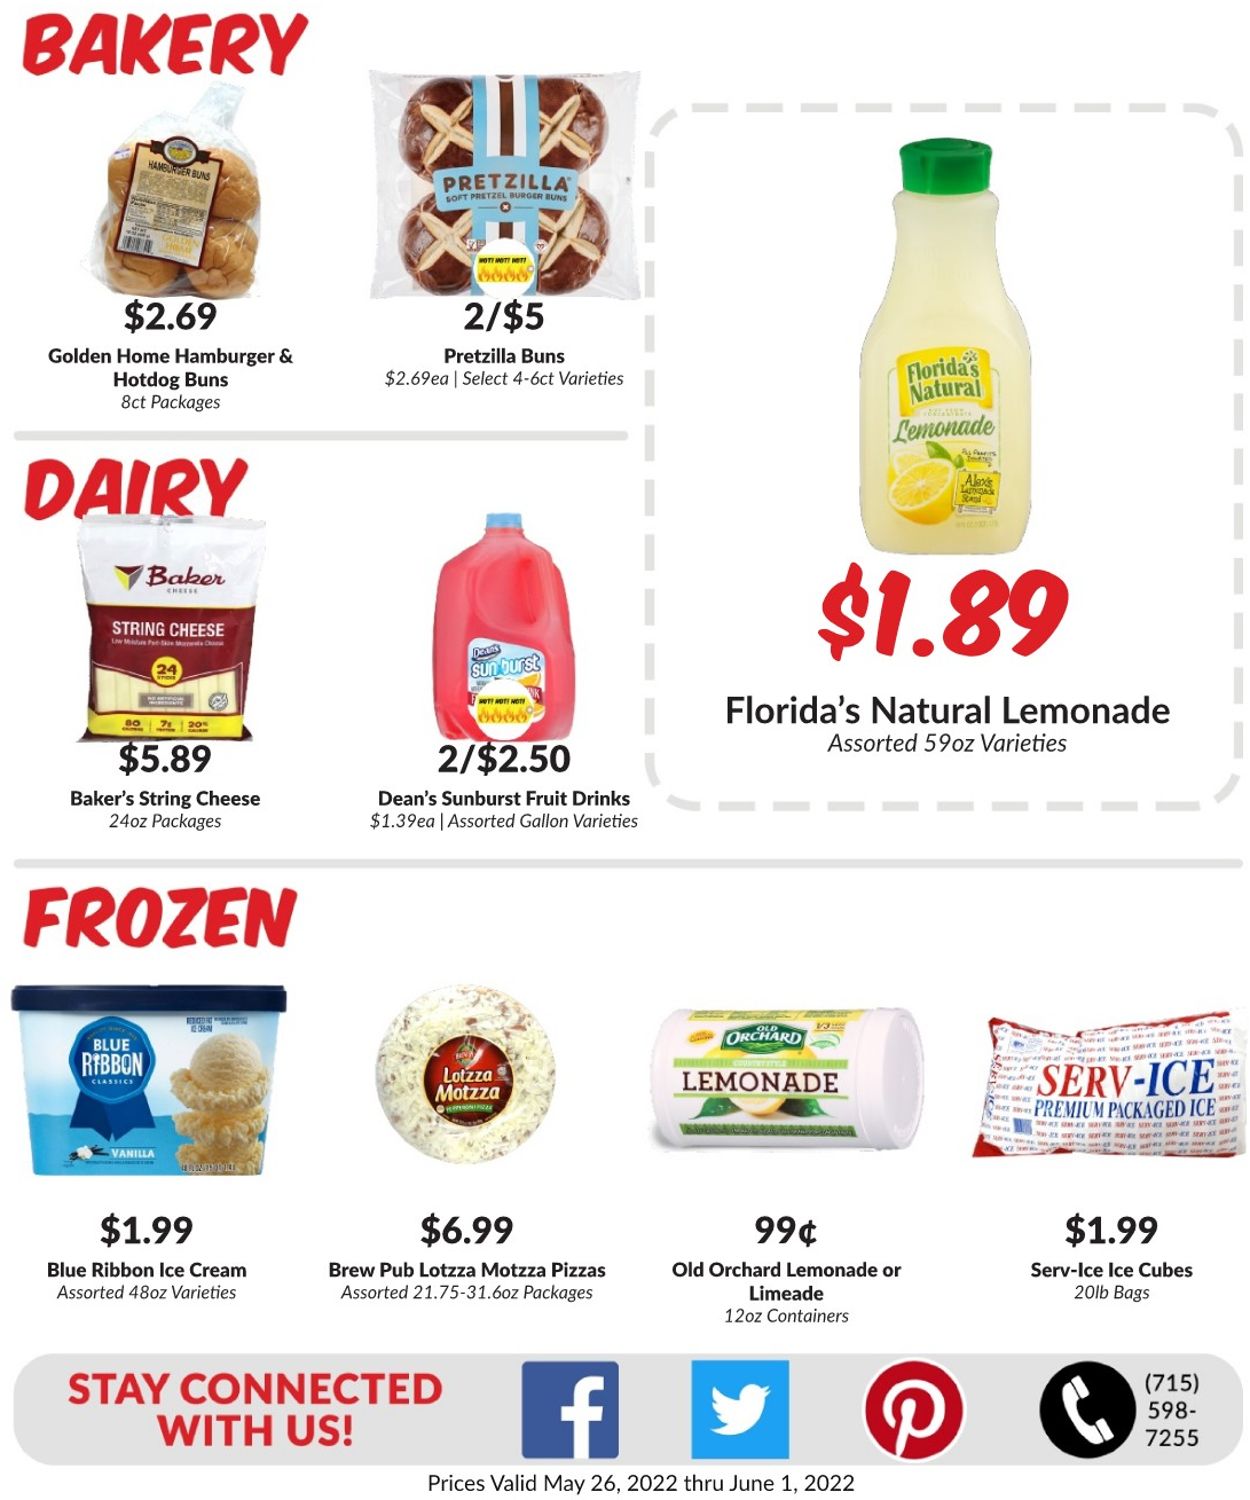 Woodman's Market Ad from 05/26/2022